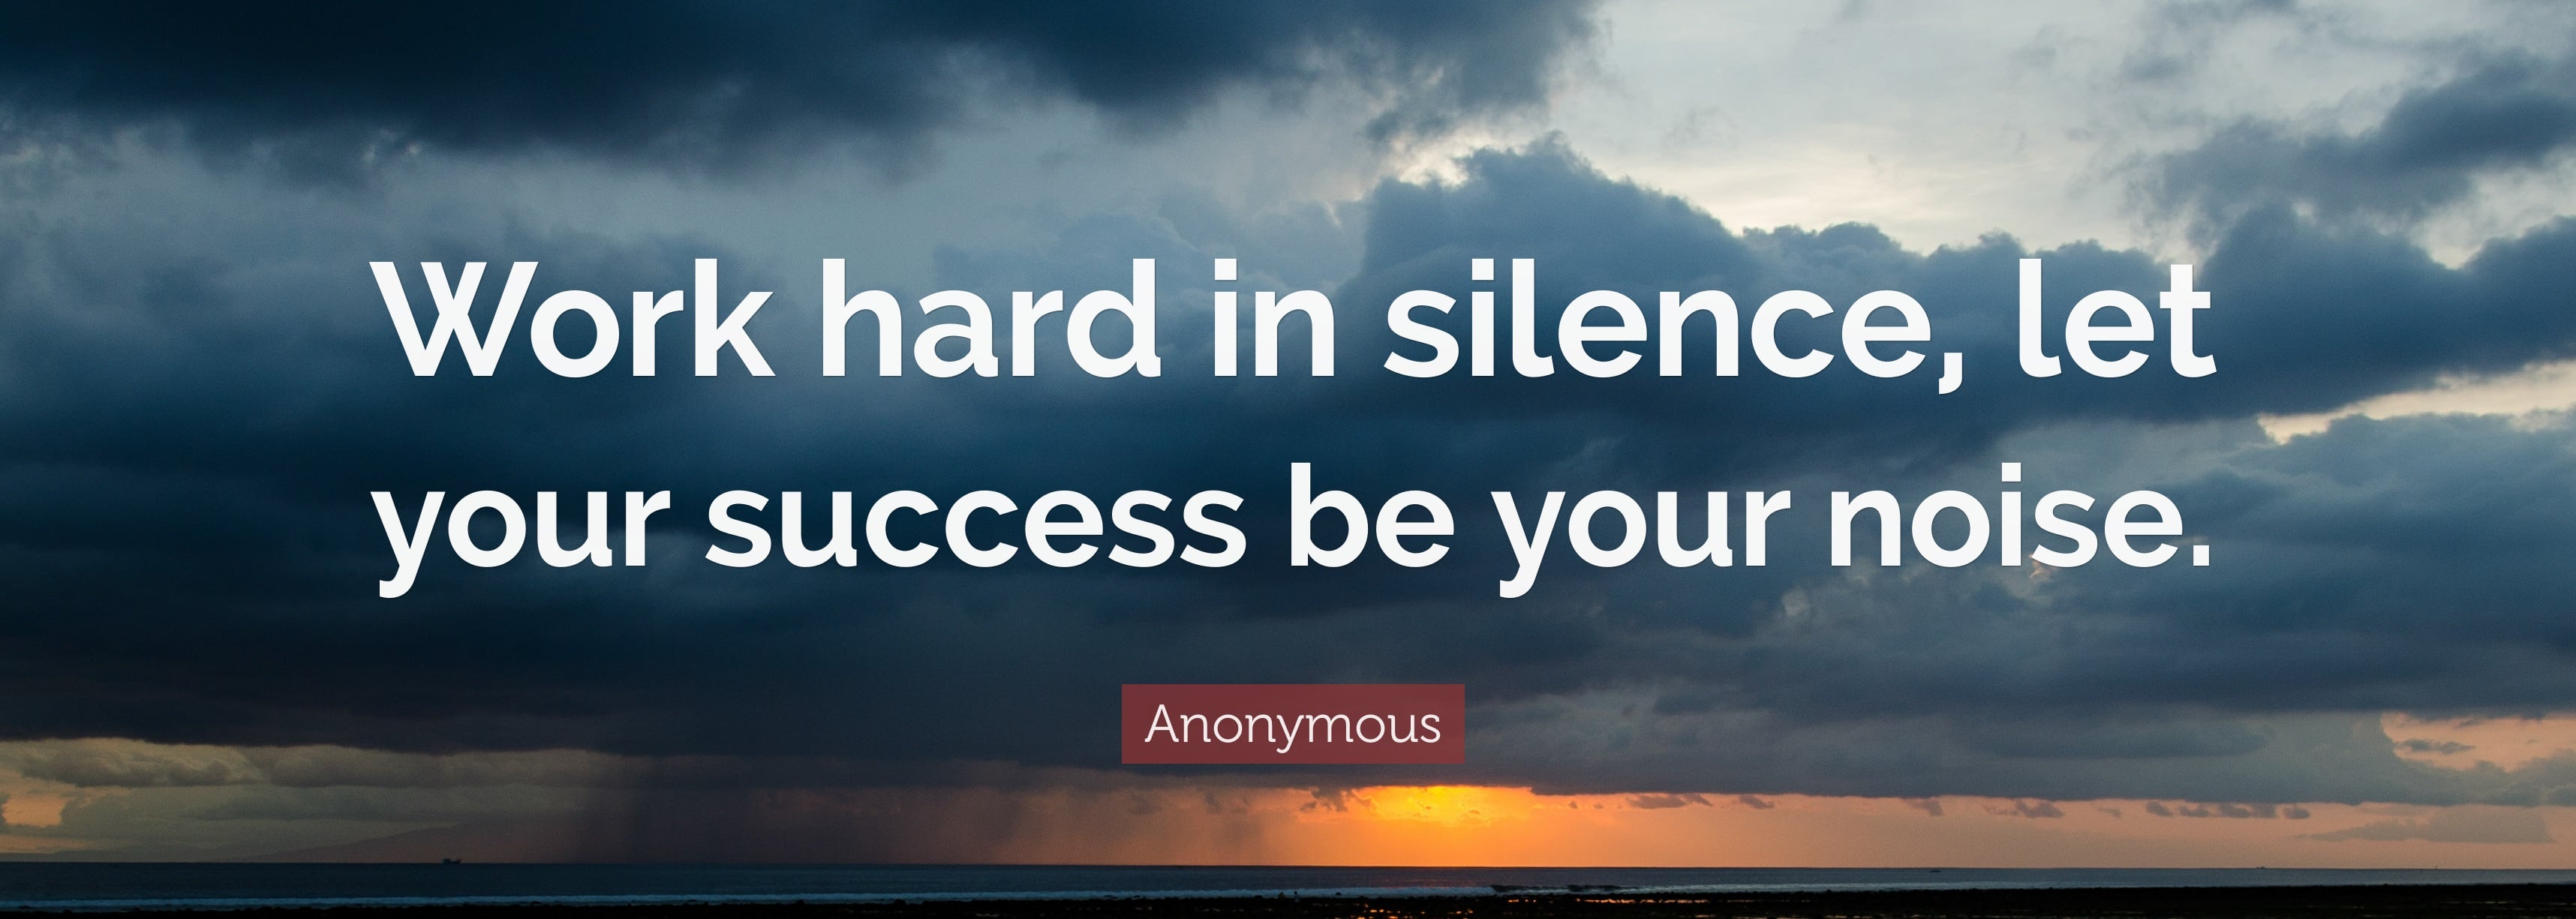 18846 Anonymous Quote Work hard in silence let your success be your